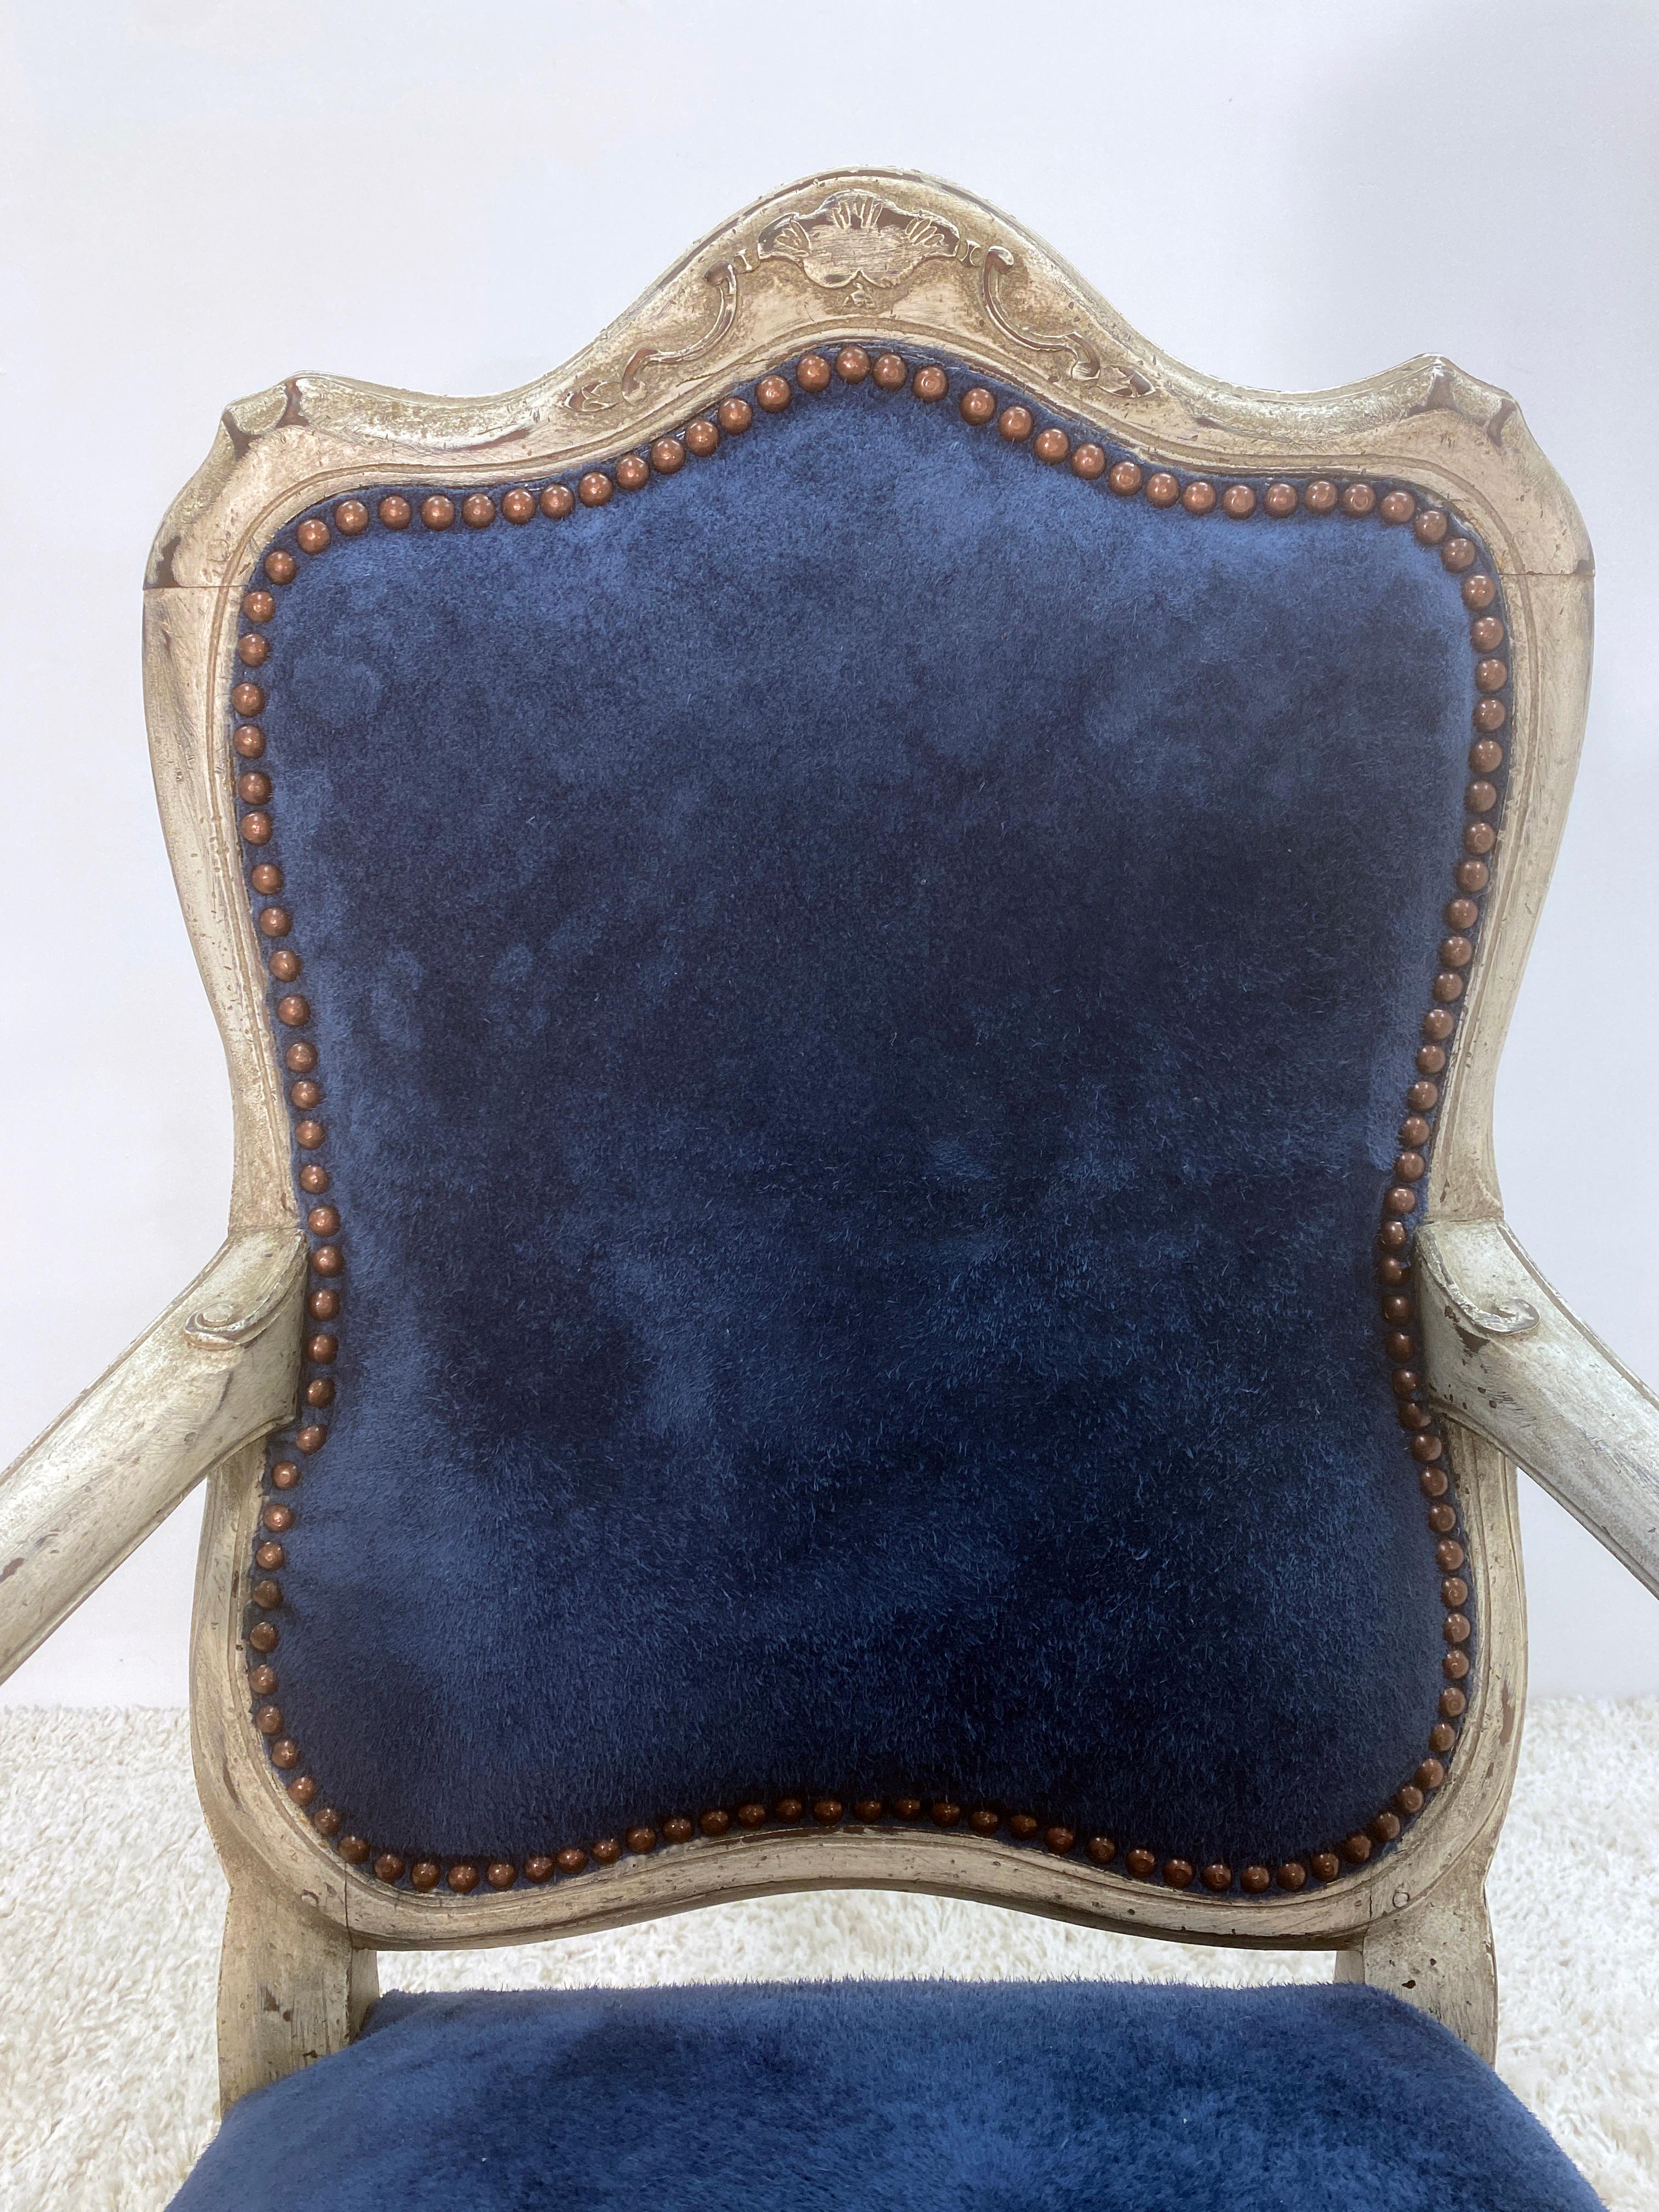 Baroque Revival 19th Century Painted Dutch Arm Chair in Blue Suede